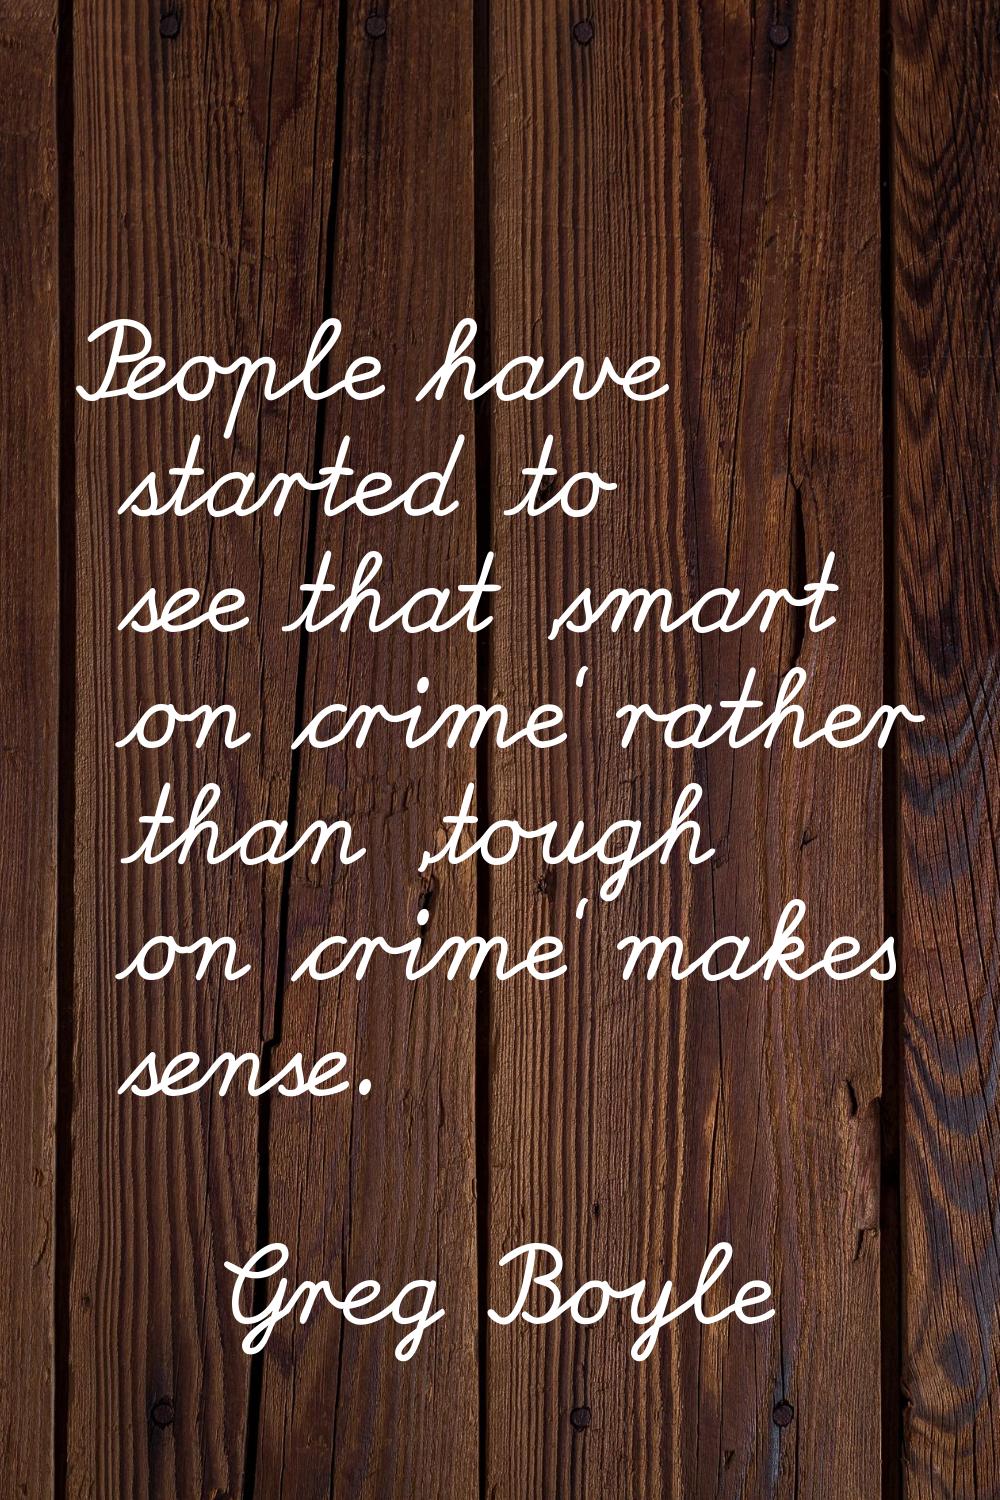 People have started to see that 'smart on crime' rather than 'tough on crime' makes sense.